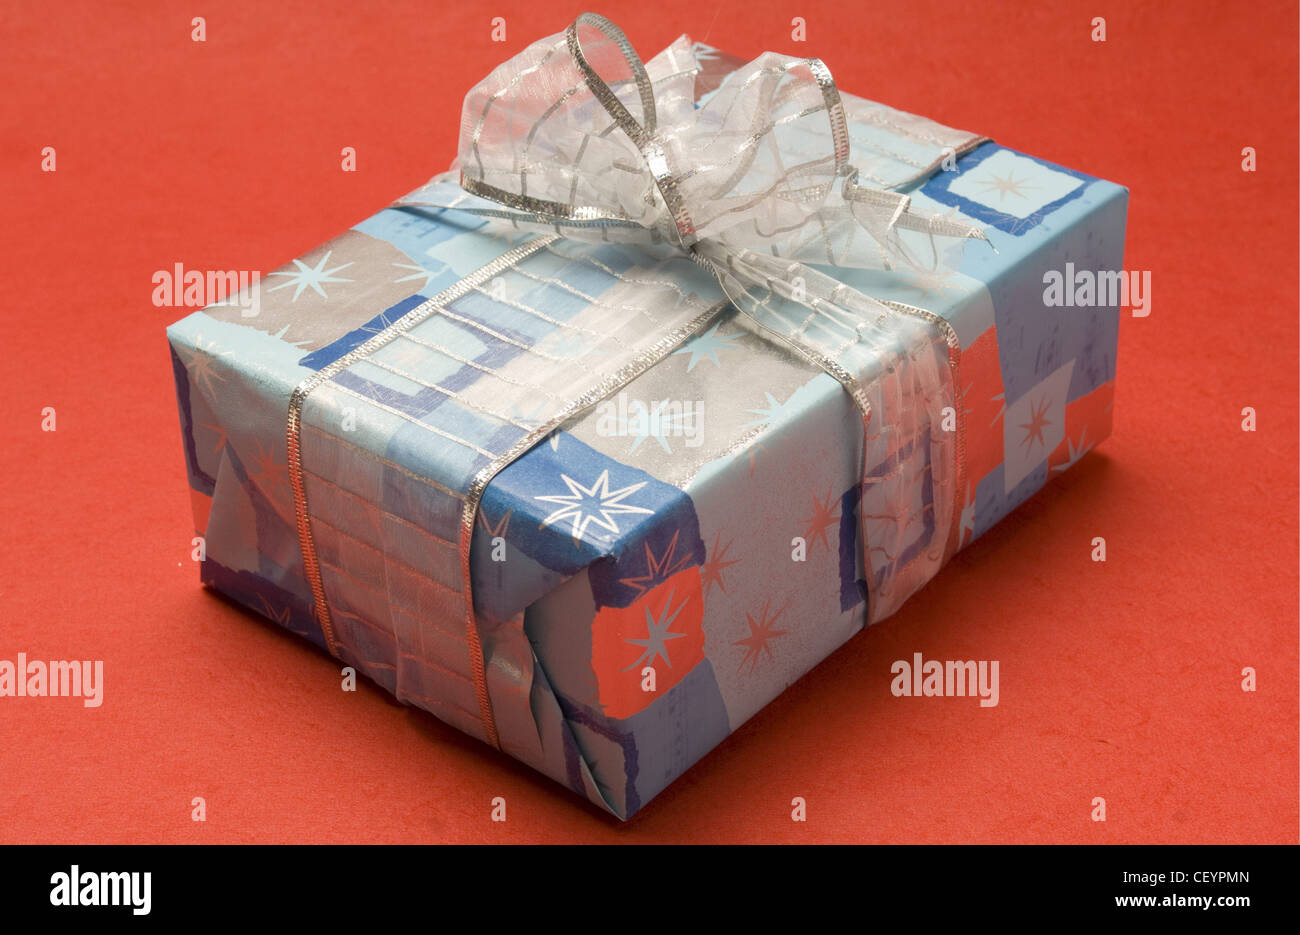 Single wrapped gift: blue and silver star patterned wrapping paper with silver ribbon, pictured on plain pink background Stock Photo